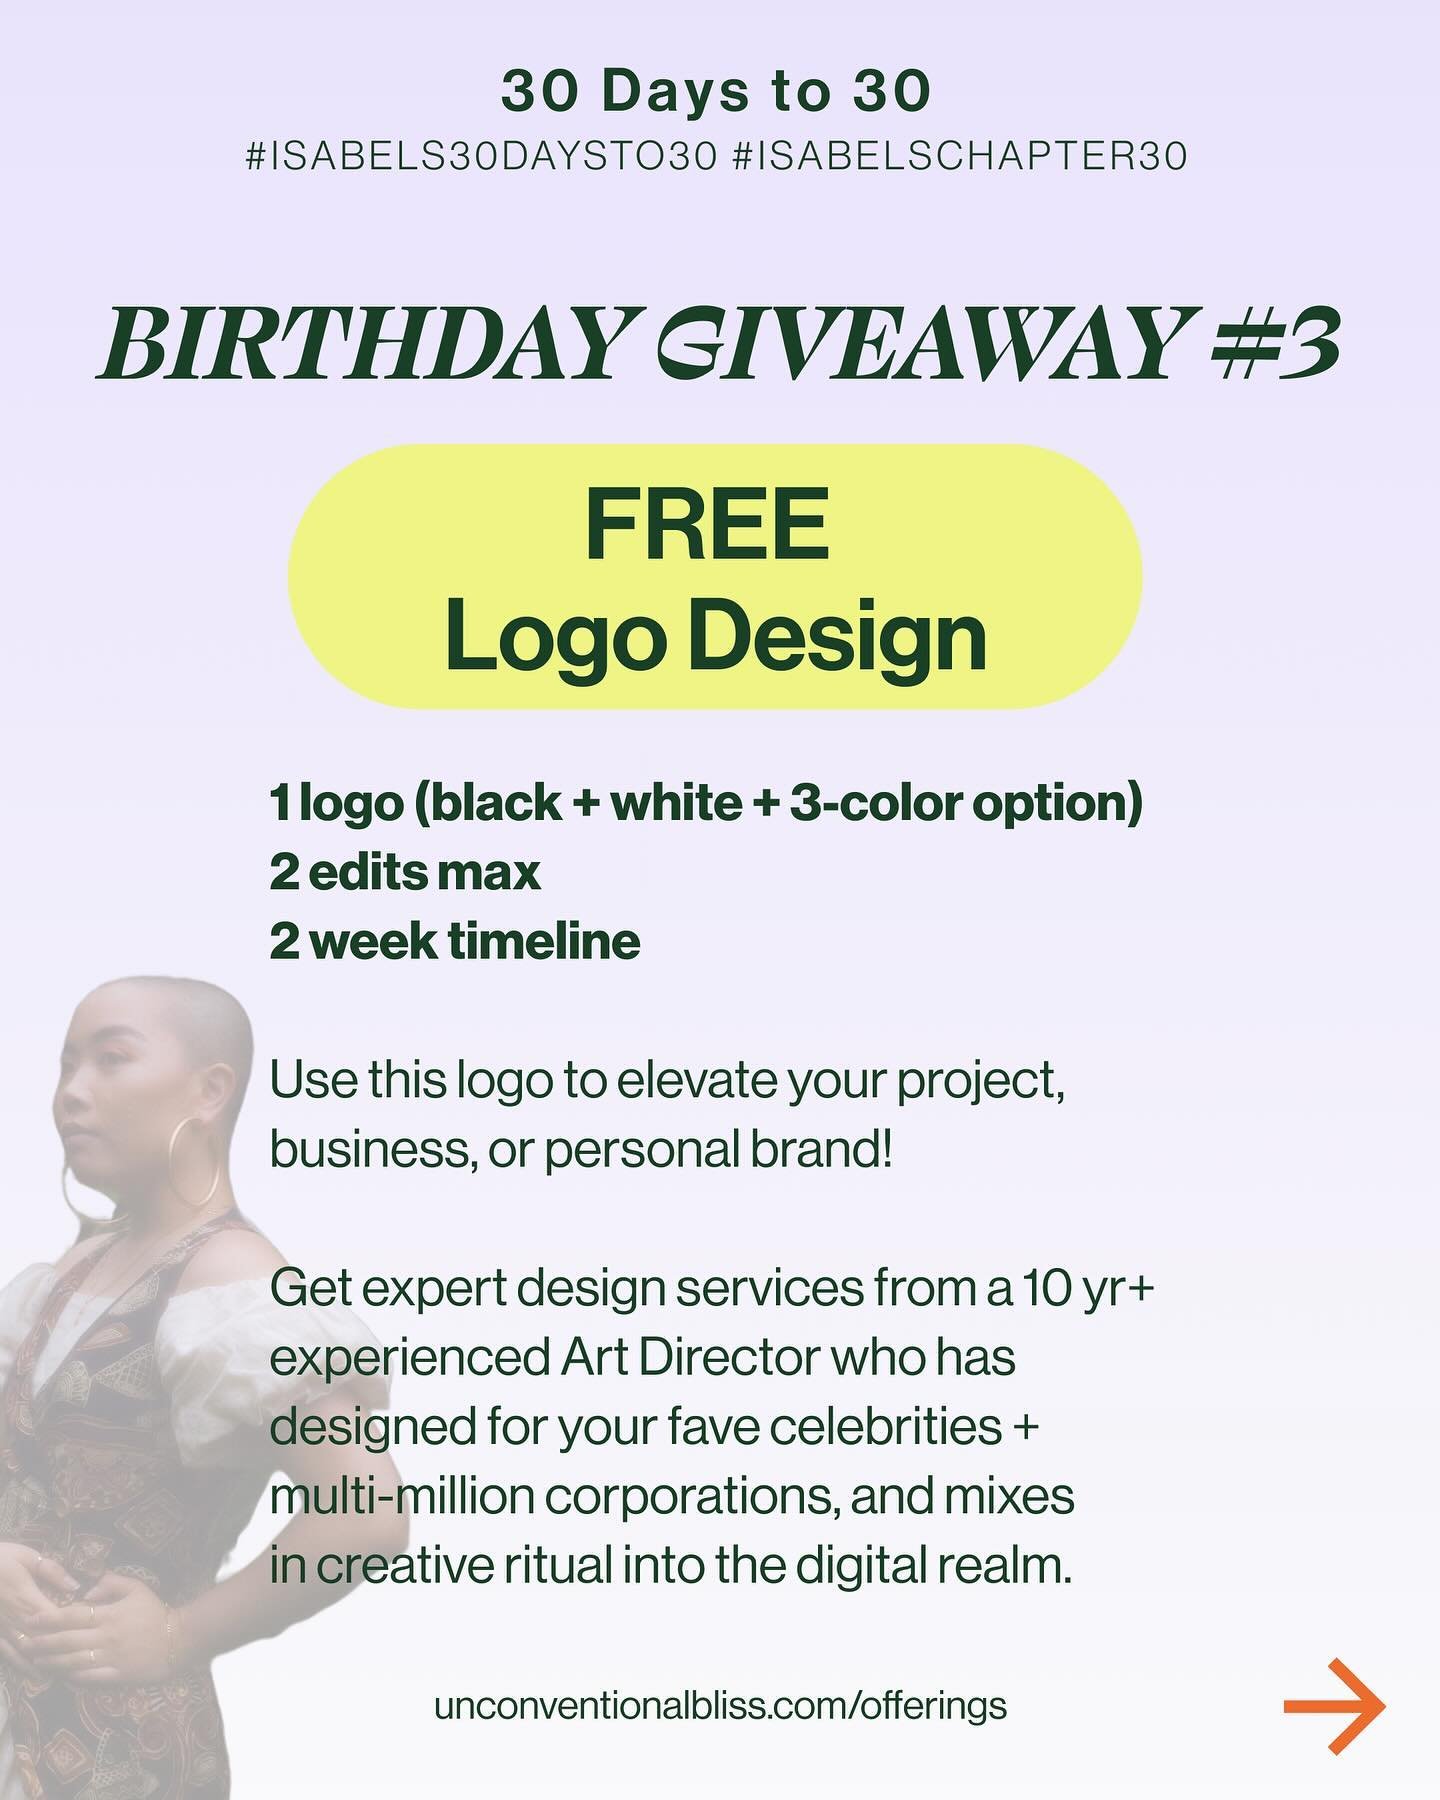 ‼️FREE LOGO DESIGN GIVEAWAY!‼️

We are already at Bday Giveaway #3 and ya&rsquo;ll this is a BIG ONE.

I am not just celebrating my 30th bday all month long&hellip;

I am celebrating my new soulful design service that is feeling just SO SO GOOD.

In 